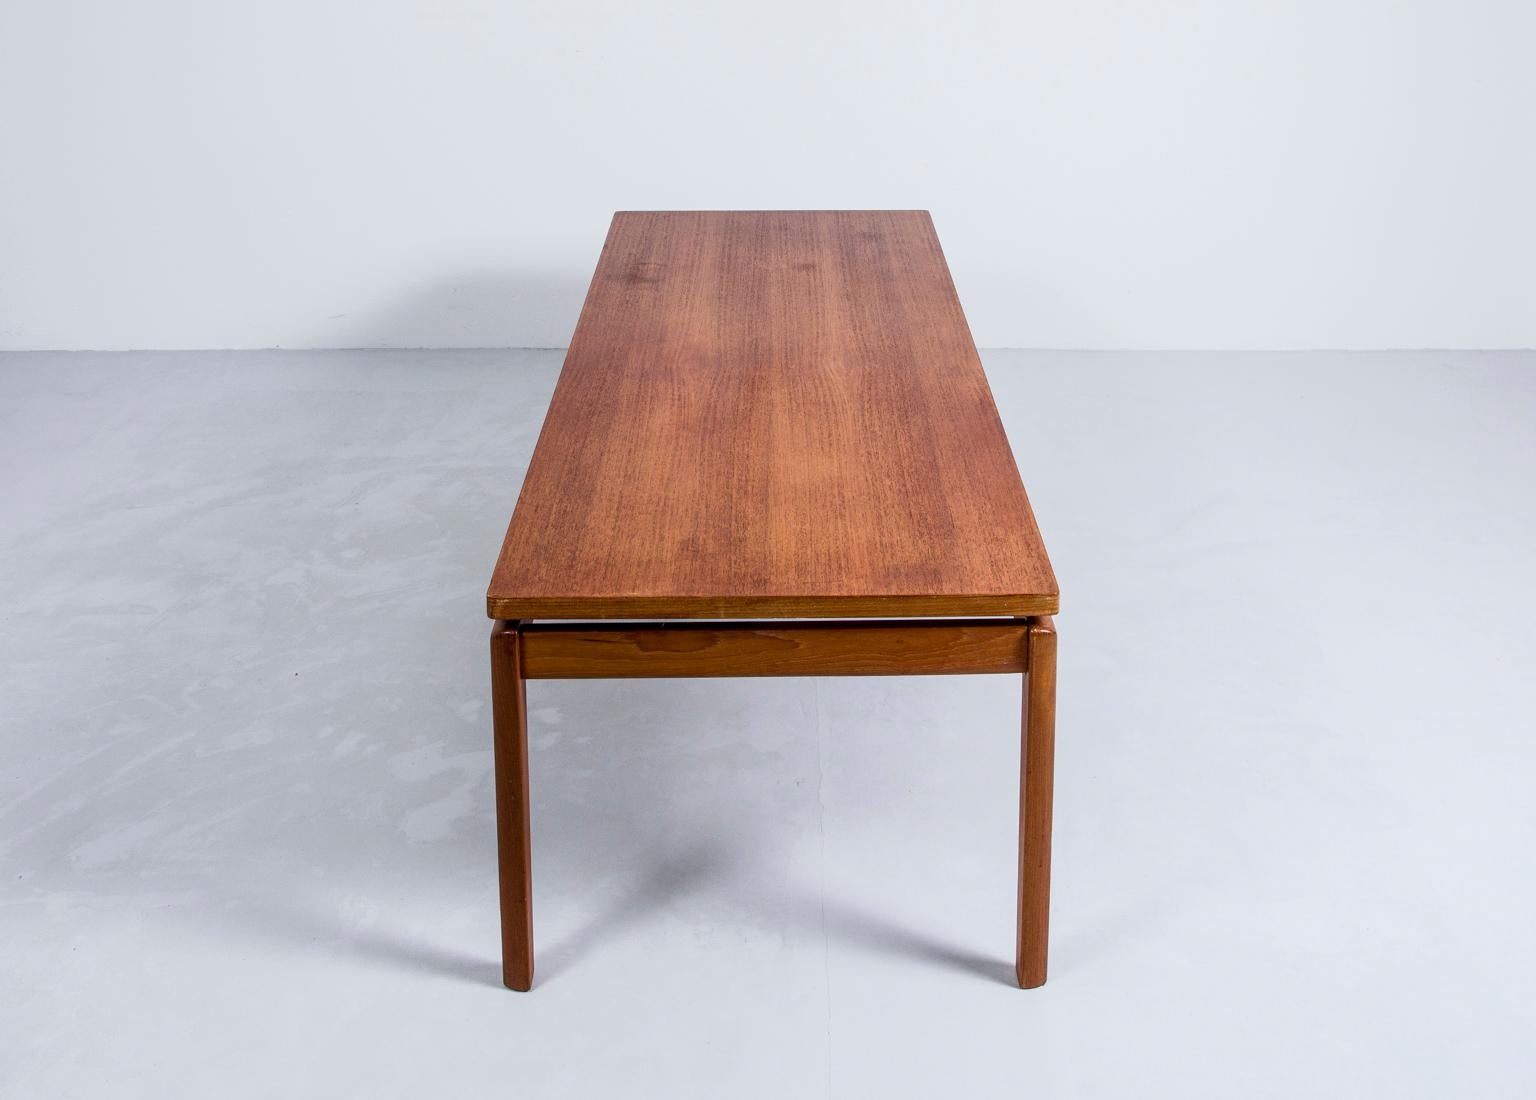 Here is a beautiful large rectangular coffee table designed by Ole Wanscher, circa 1960s. It features a large floating table top with a glowing teak grain resting on four skinny sculpted solid teak legs.
The table top is marked underneath.